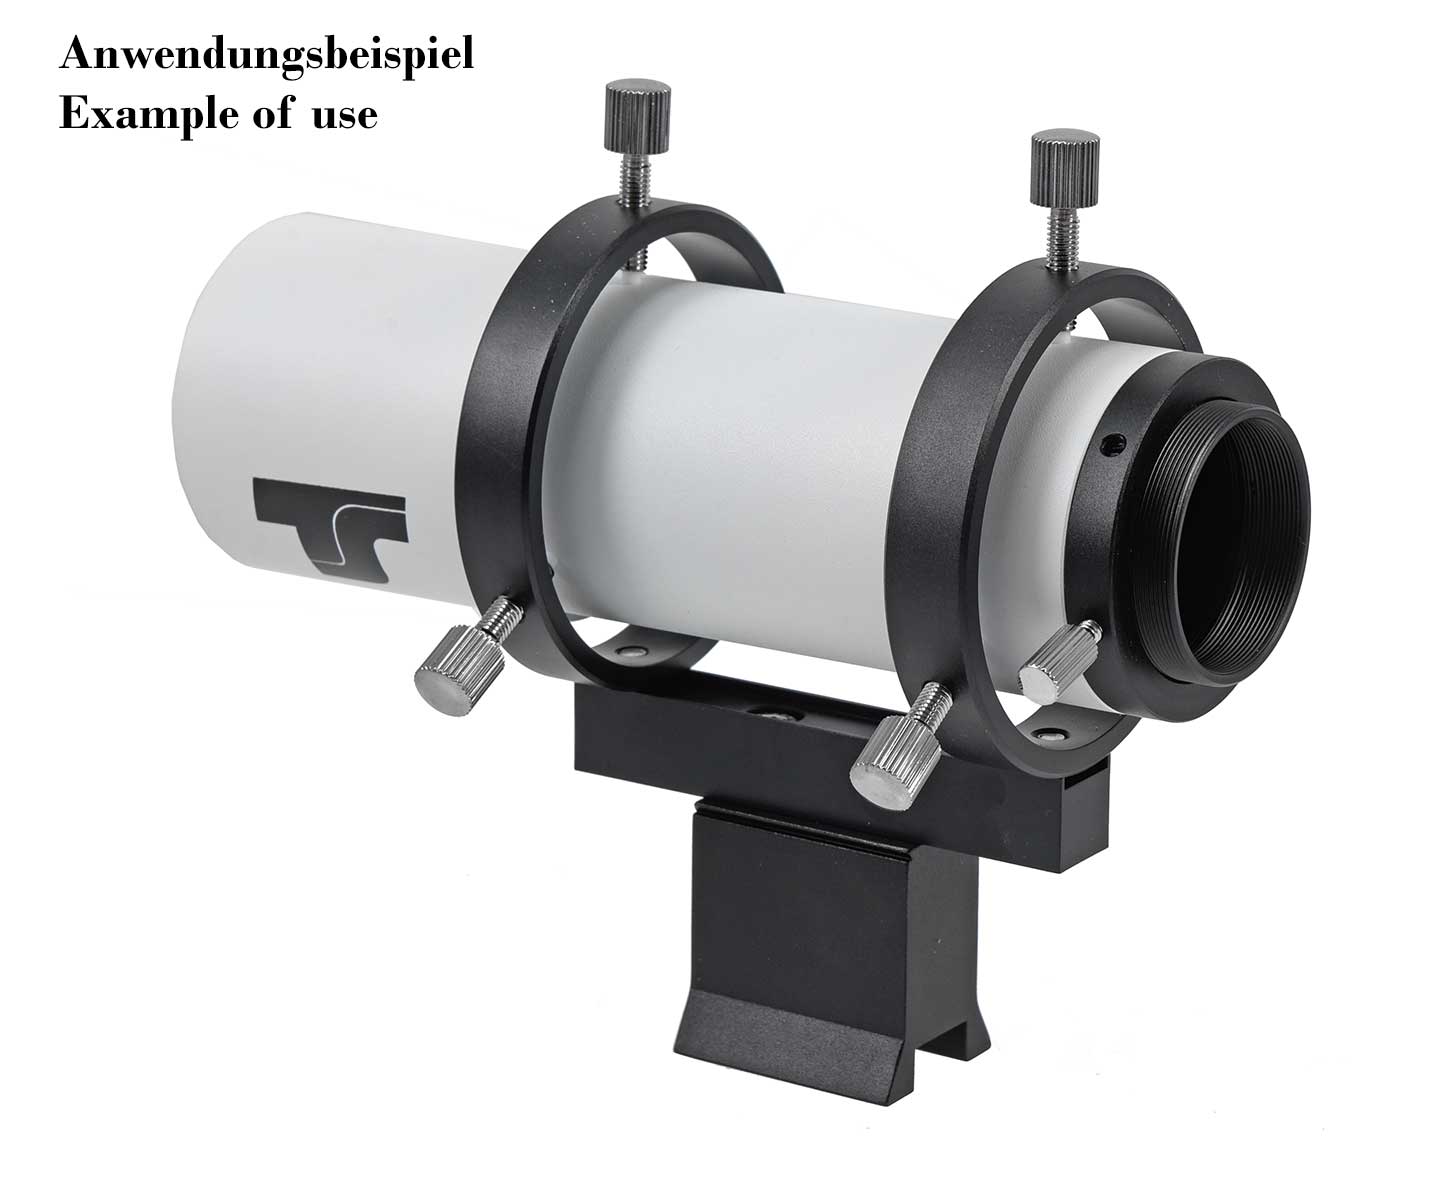 
TS-Optics 50 mm Angled Finder and Guide Scope with 90° View - 1.25" and T2 Connection [EN]
